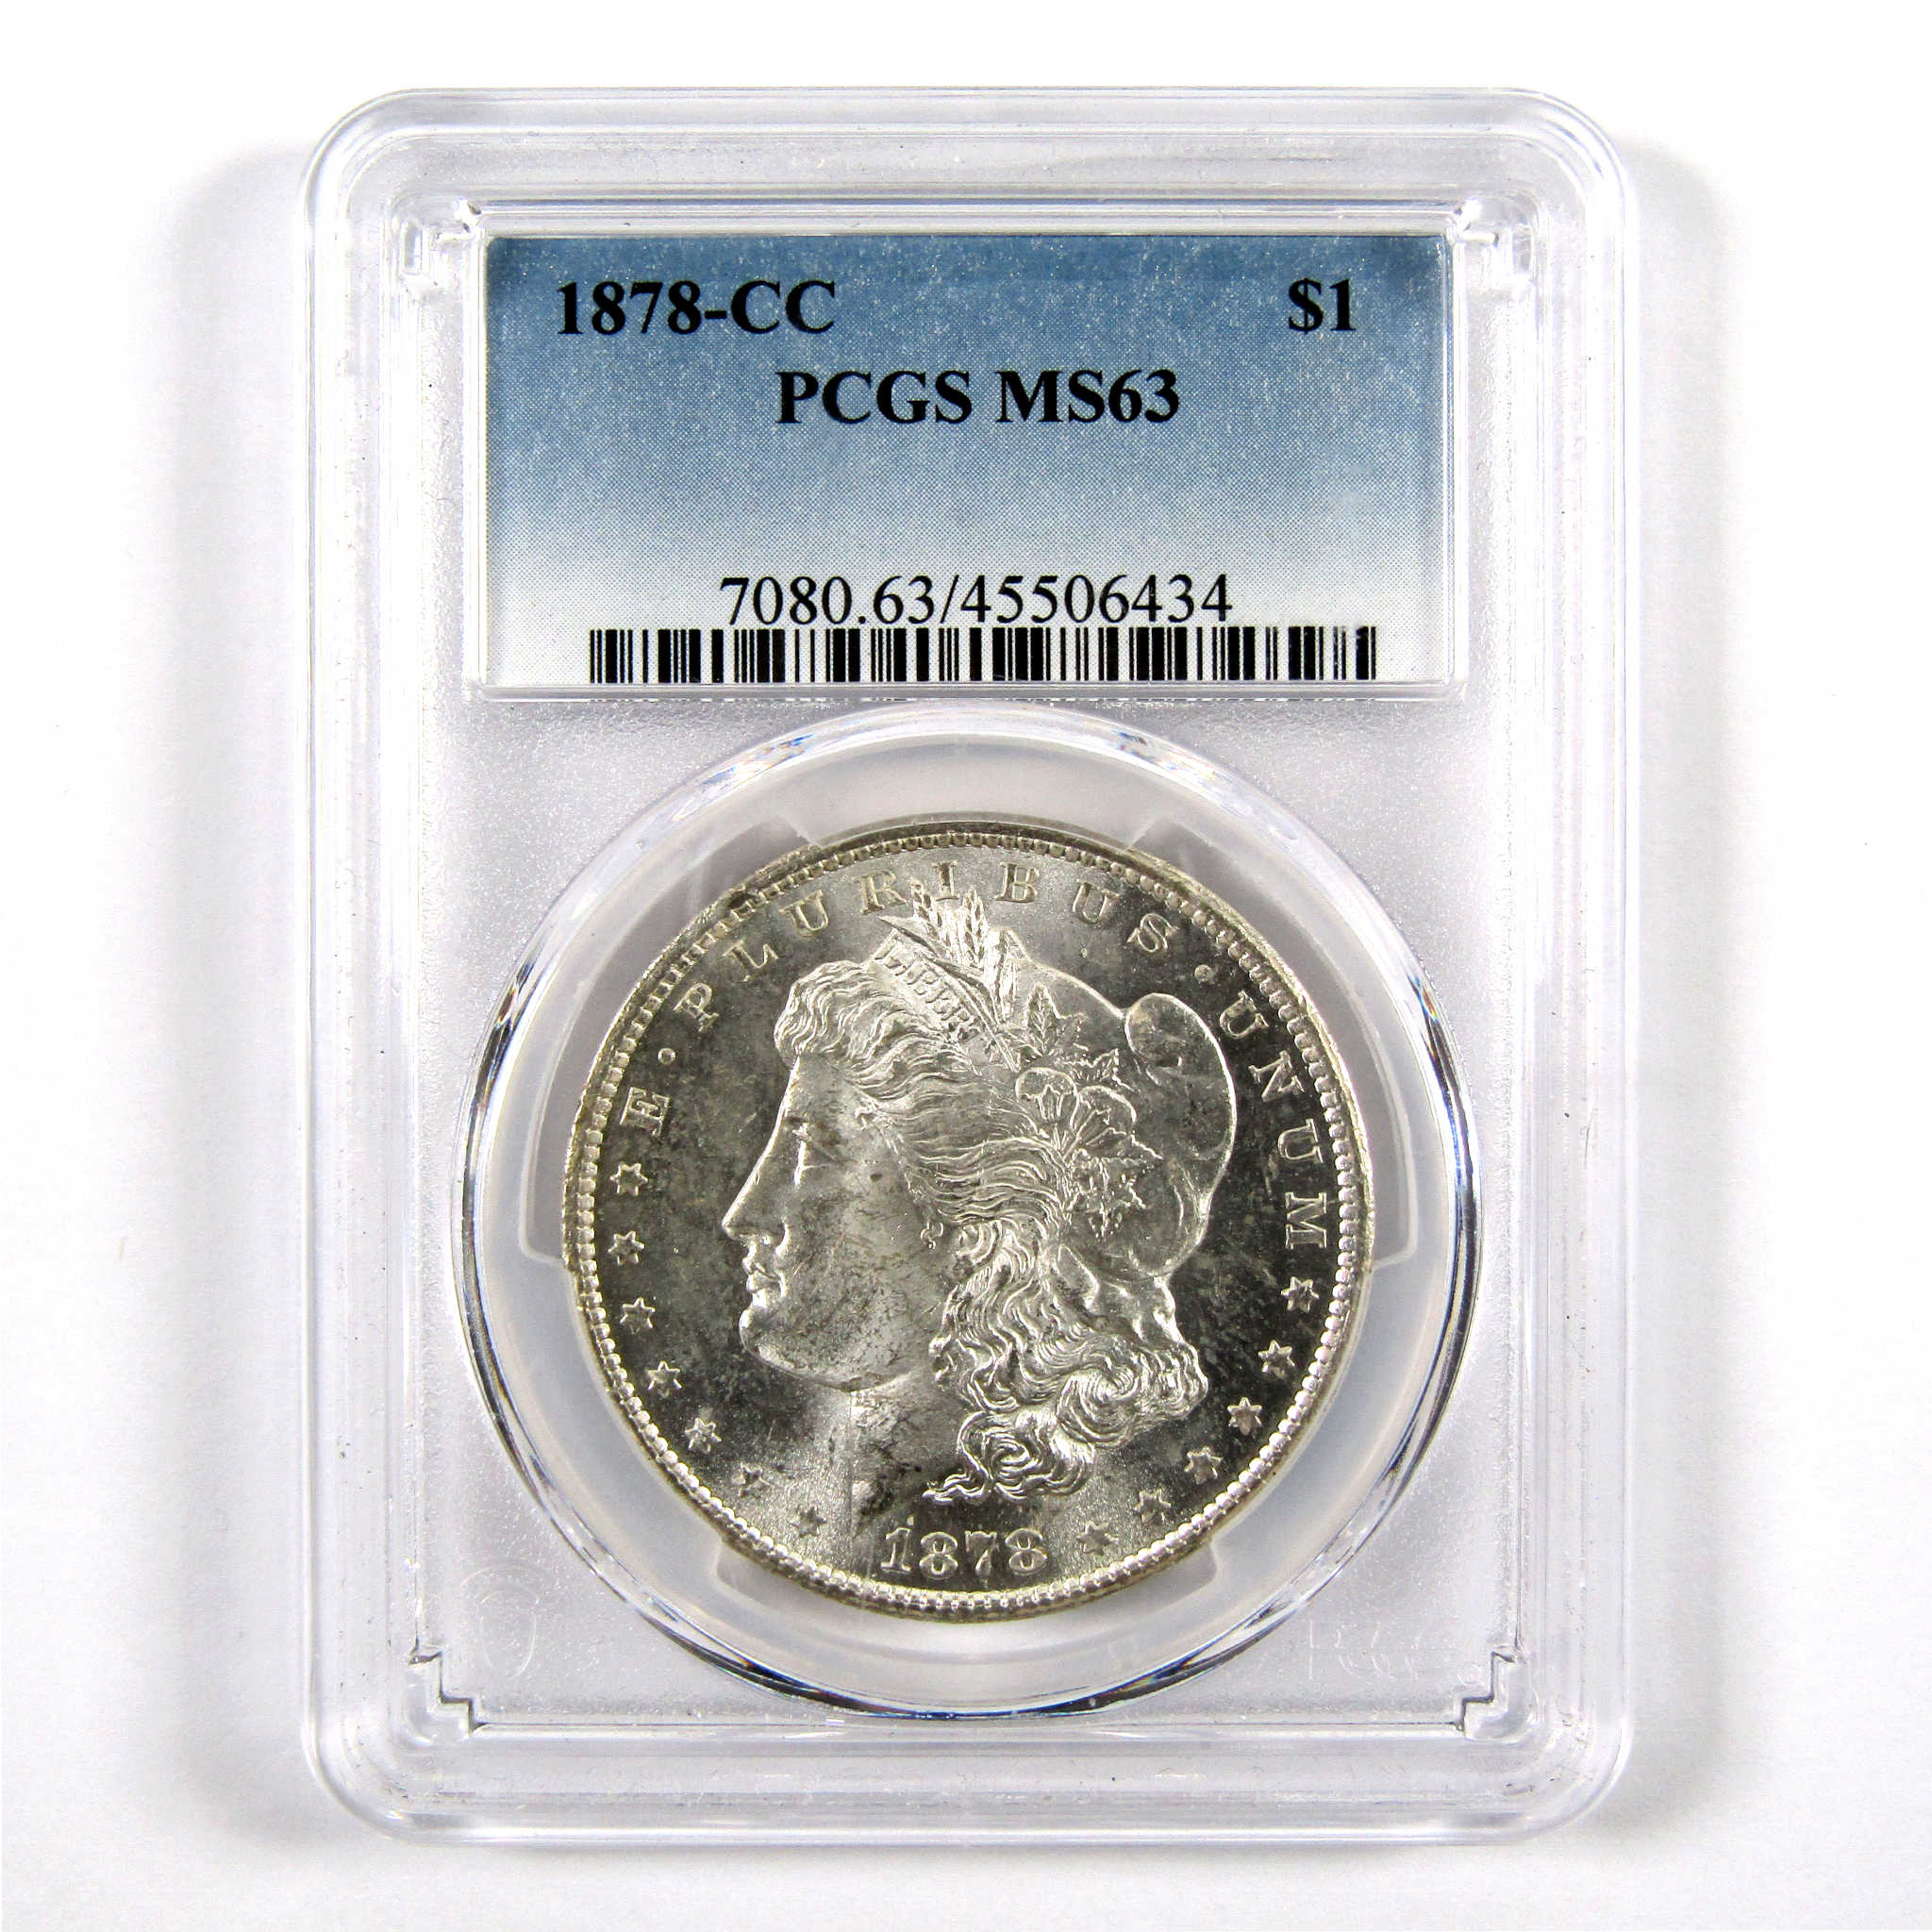 1878 CC Morgan Dollar MS 63 PCGS Silver $1 Uncirculated SKU:I11011 - Morgan coin - Morgan silver dollar - Morgan silver dollar for sale - Profile Coins &amp; Collectibles